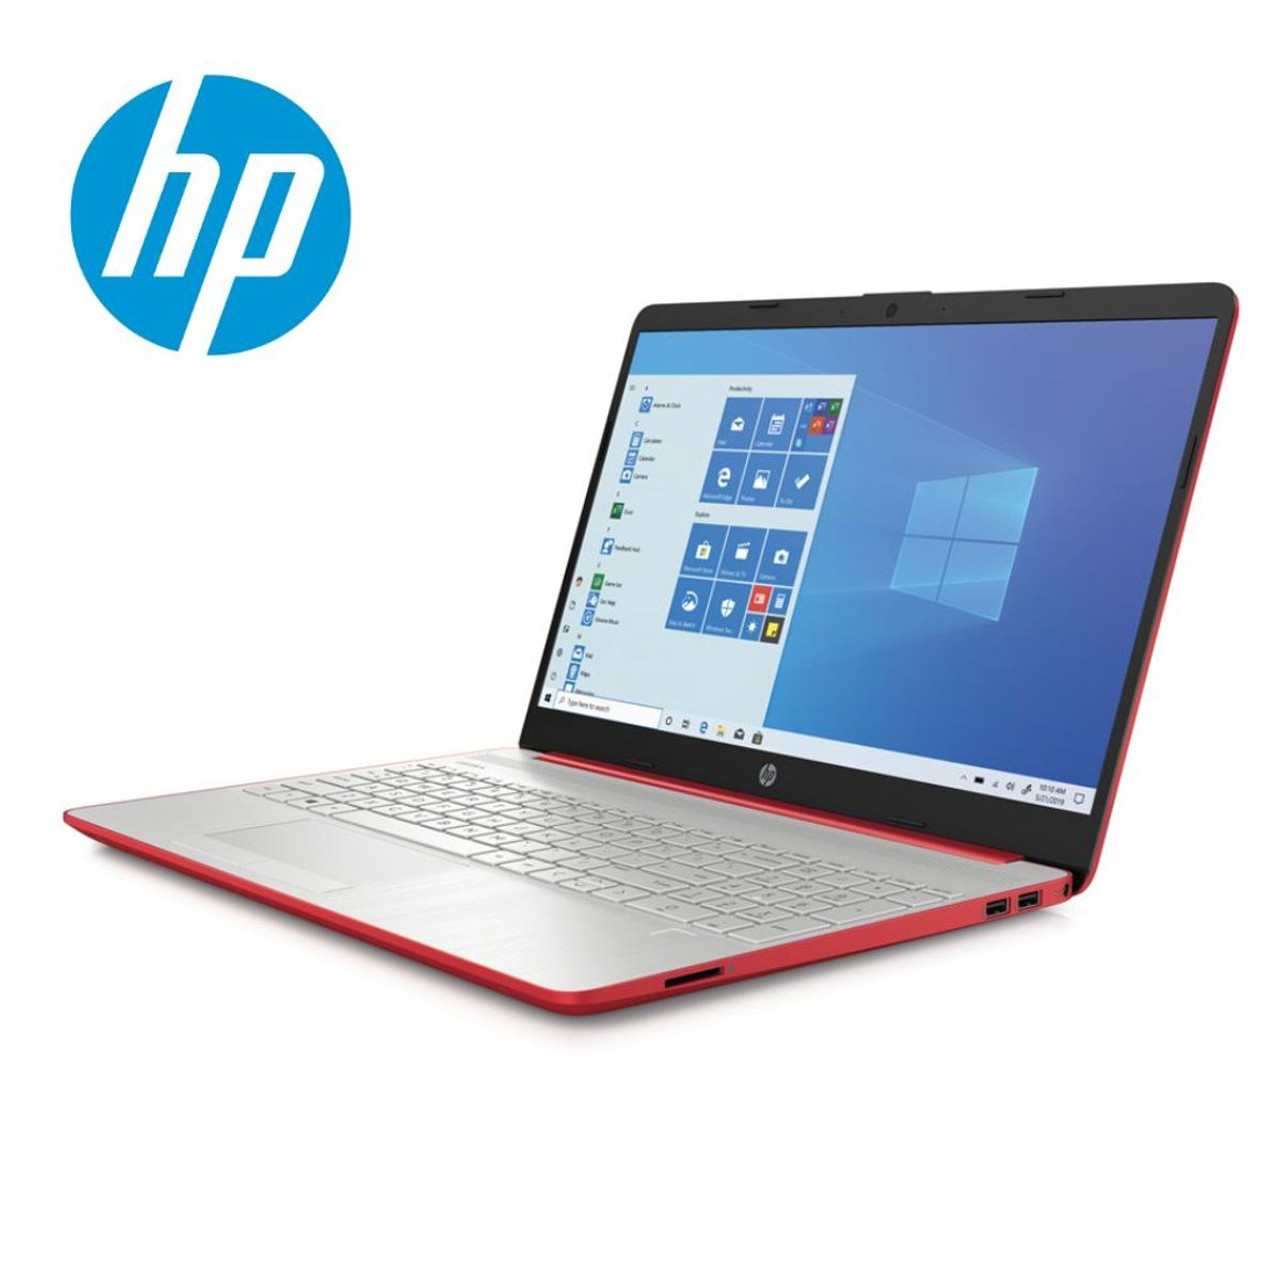 HP® 15.6" HD Laptop with Intel N5000, 4GB RAM, 128GB SSD (2020 Release) product image